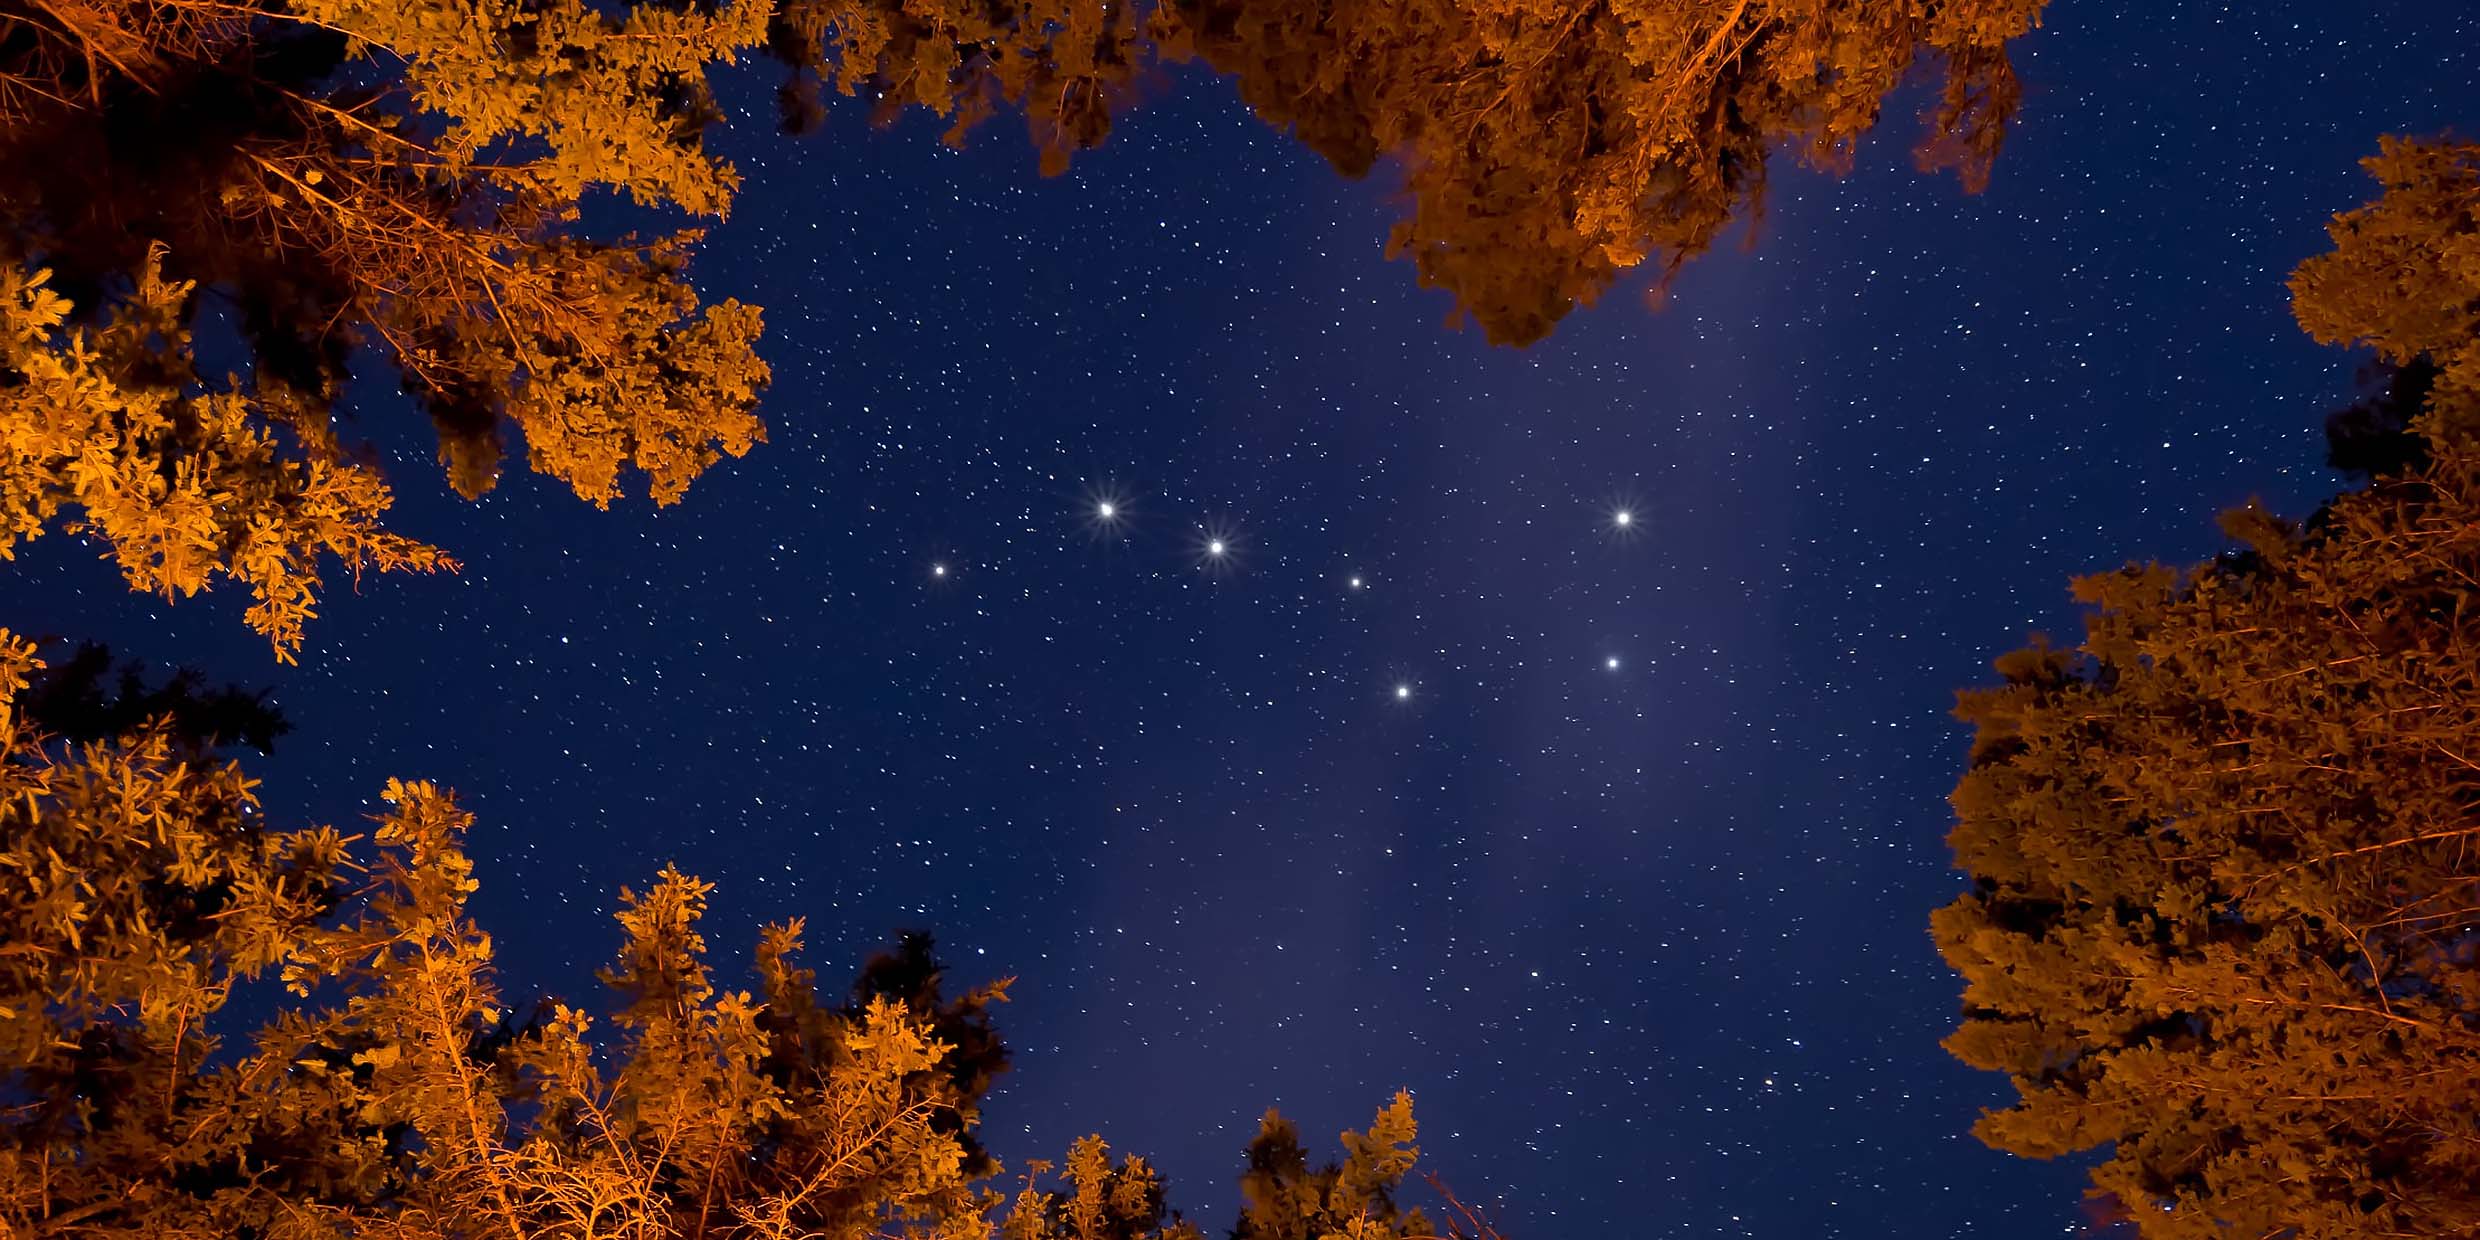 Image of the Big Dipper in the night sky